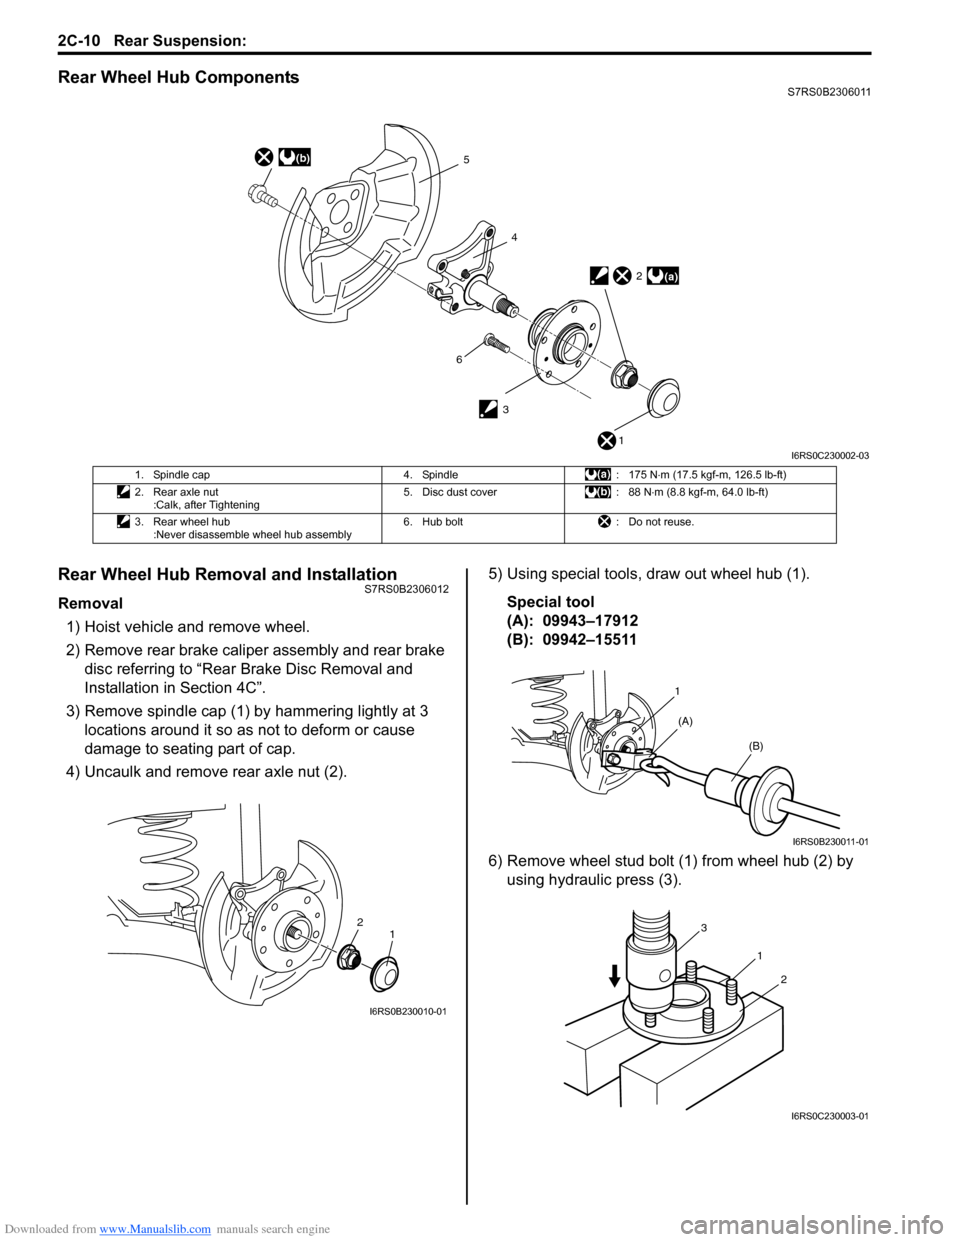 SUZUKI SWIFT 2007 2.G Service Workshop Manual Downloaded from www.Manualslib.com manuals search engine 2C-10 Rear Suspension: 
Rear Wheel Hub ComponentsS7RS0B2306011
Rear Wheel Hub Removal and InstallationS7RS0B2306012
Removal1) Hoist vehicle and